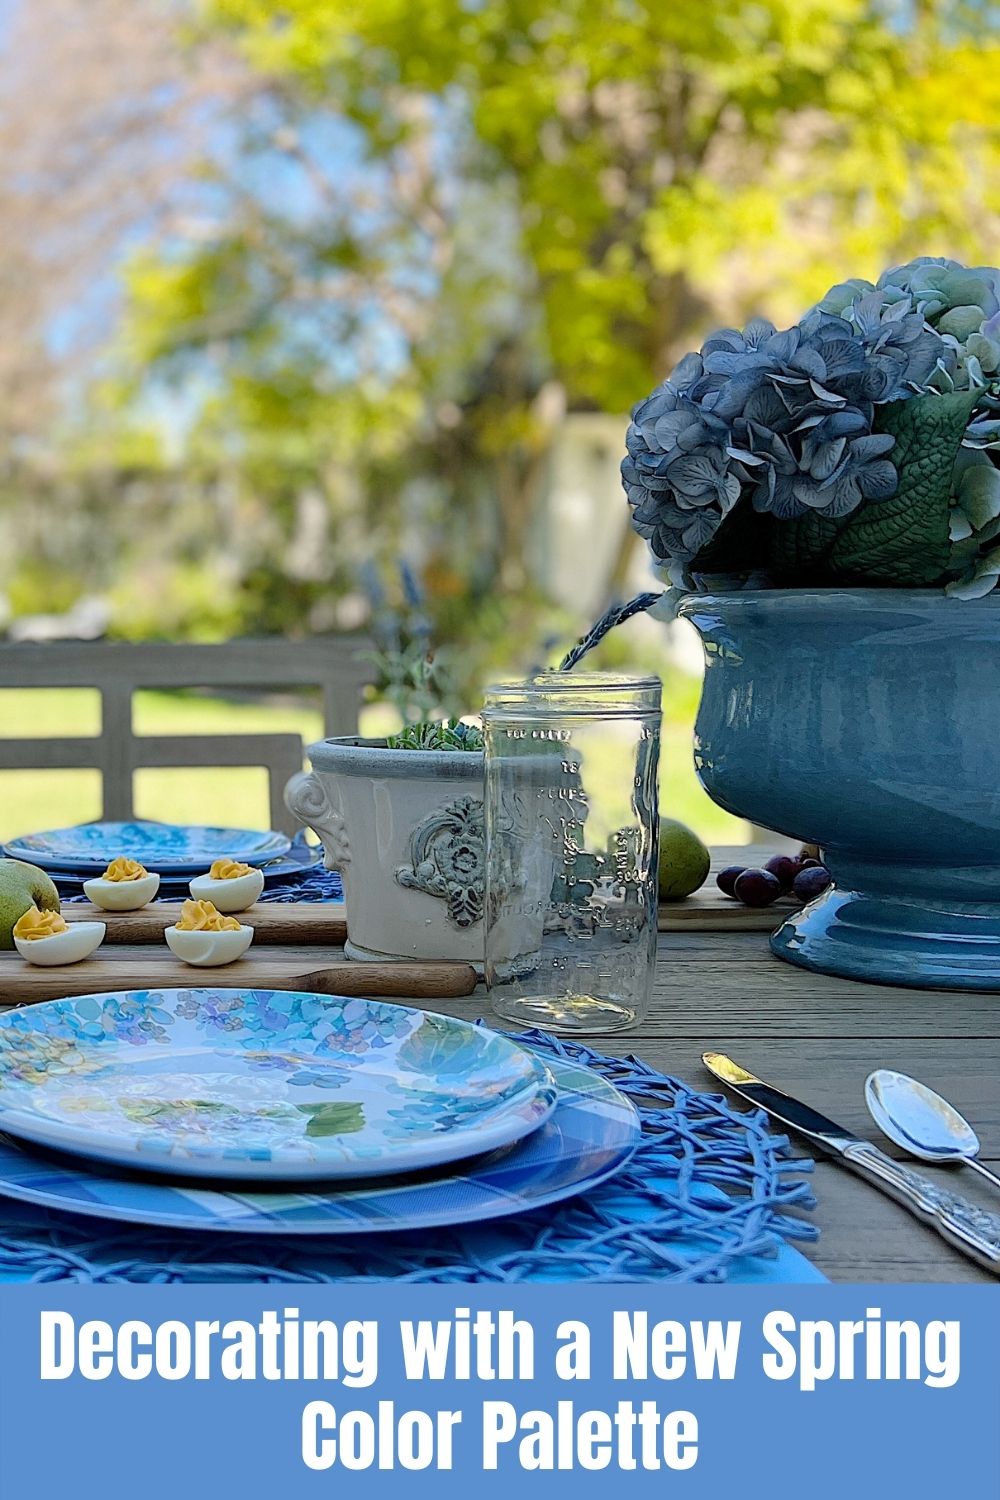 I can’t stop thinking about spring so I thought it might be fun to create a table with a new spring color palette.